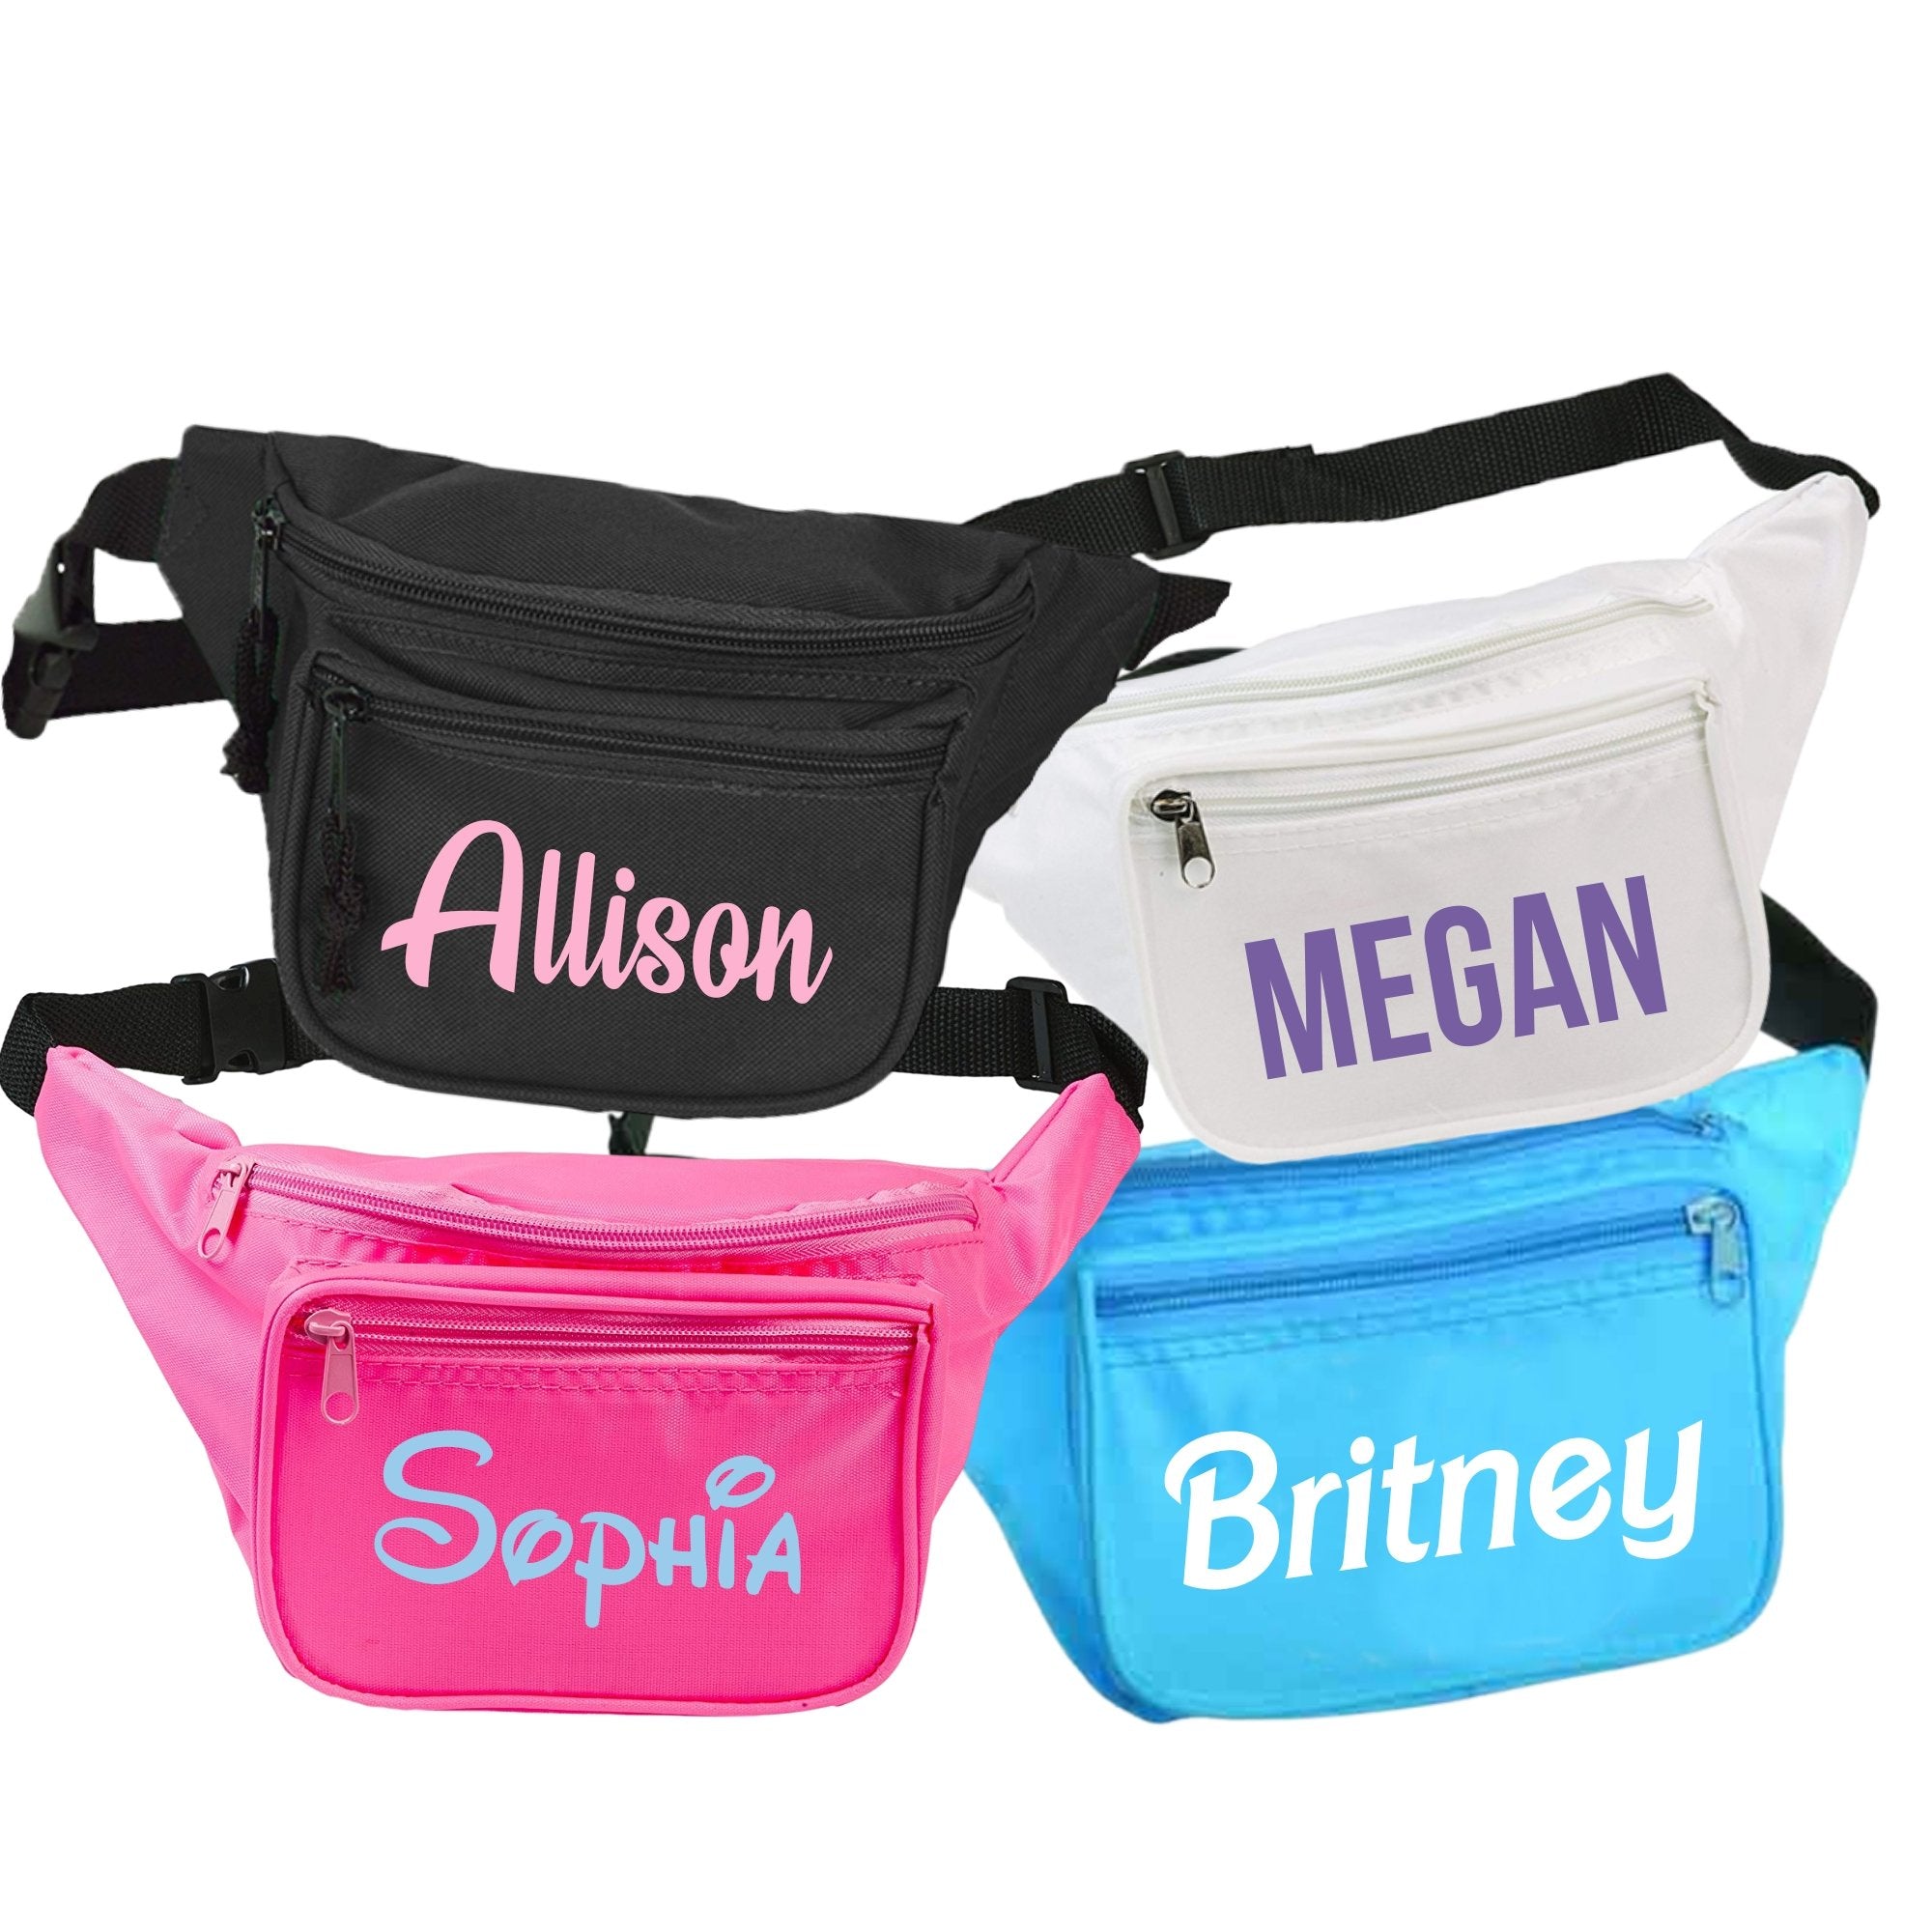 Custom Name Fanny Pack - Sprinkled With Pink #bachelorette #custom #gifts